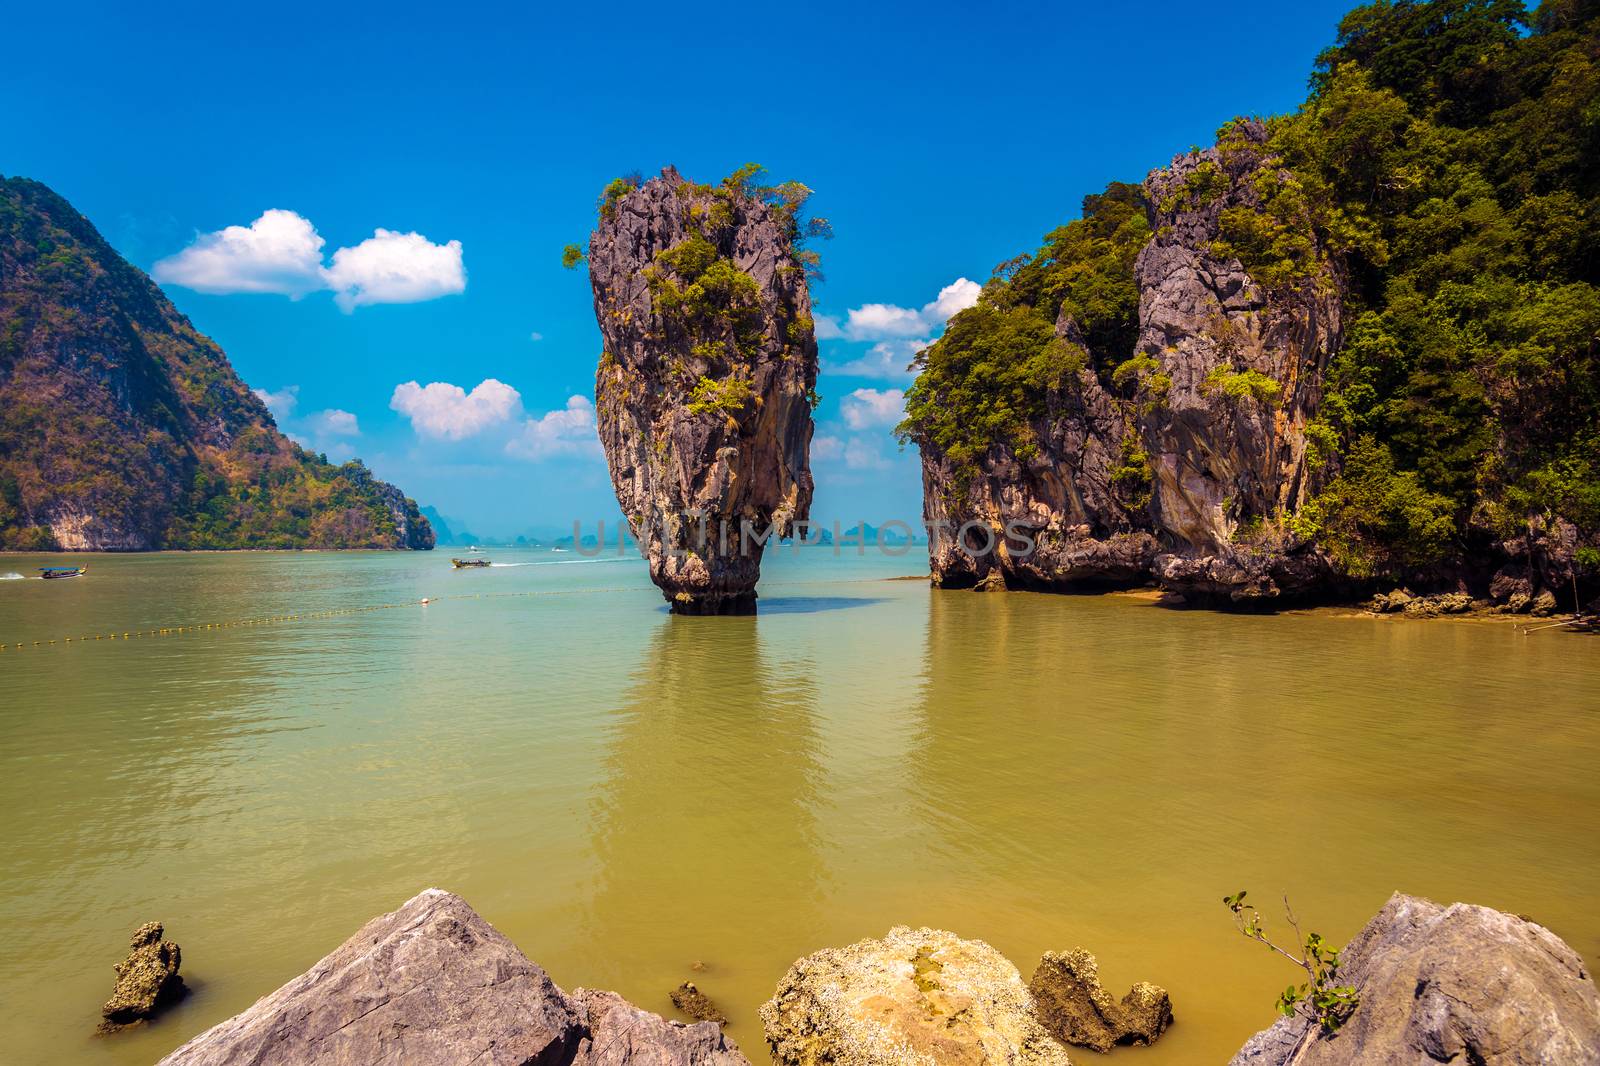 Khao Phing Kan featuring the 20m tall islet known as Ko Tapu in Phang nga bay in thailand. It is also known as the James Bond island after the 1974 James Bond movie - The Man with the Golden Gun was shot here.